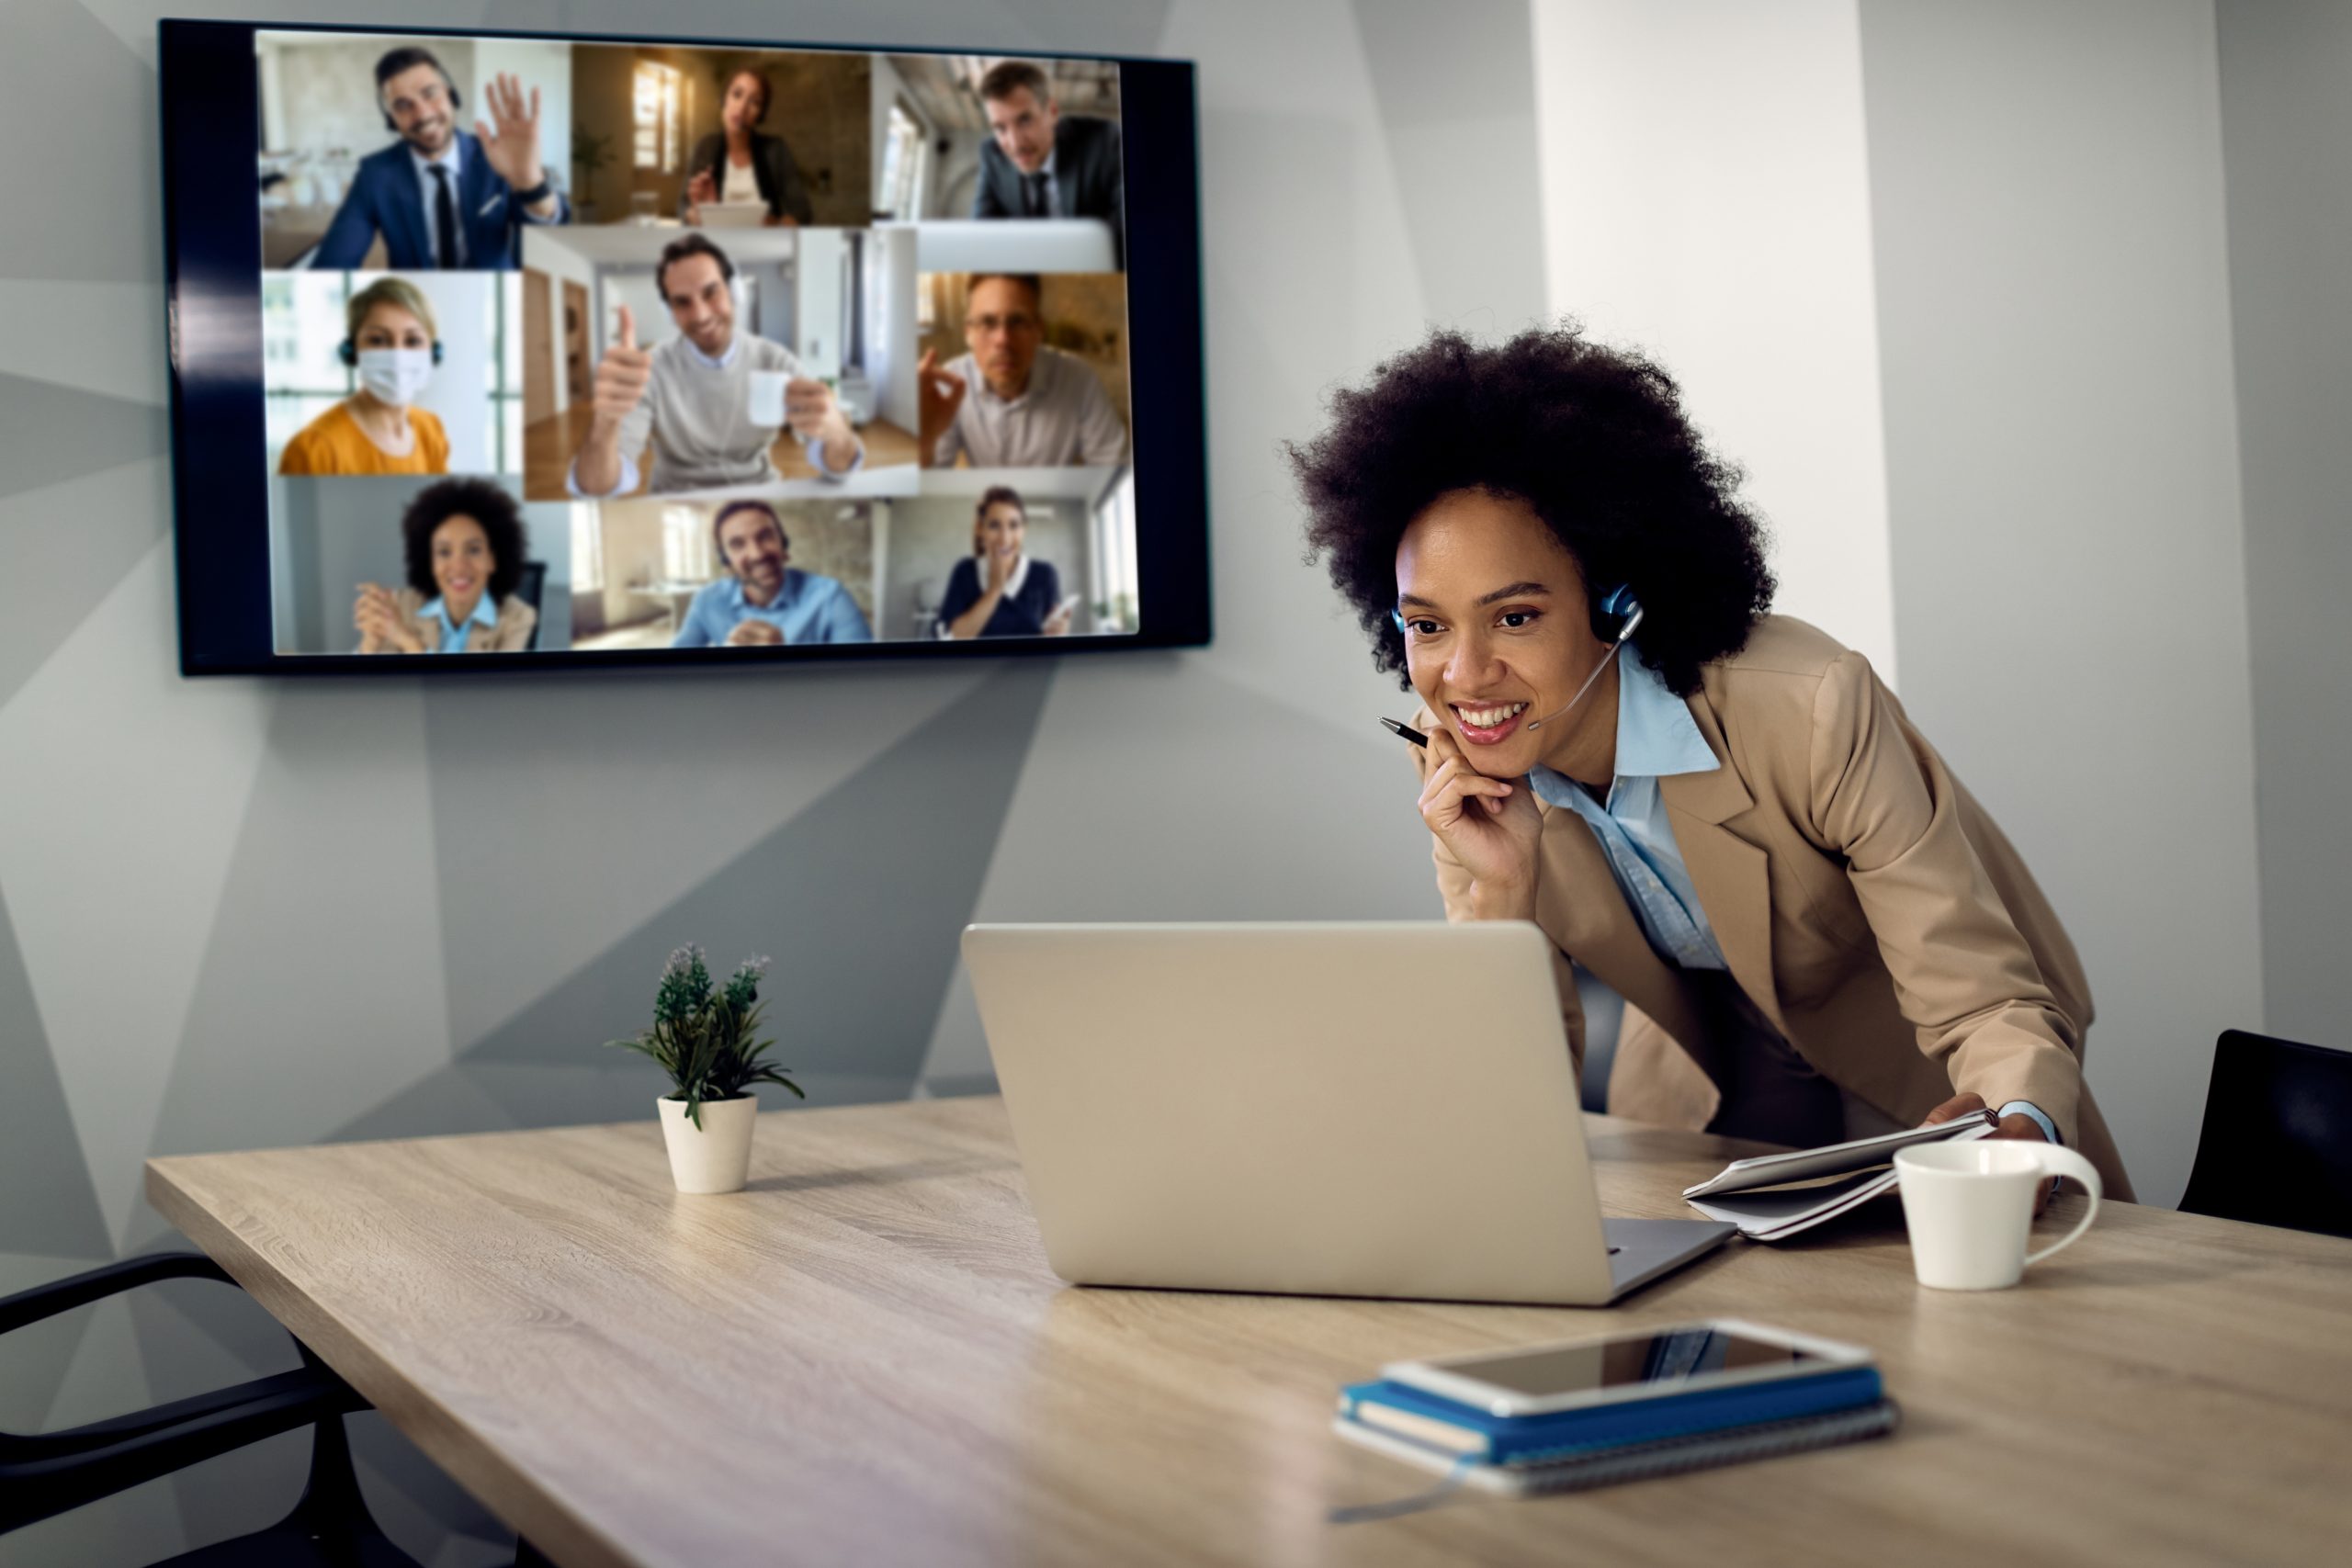 A young woman talks to her colleagues via video chat at her home office.